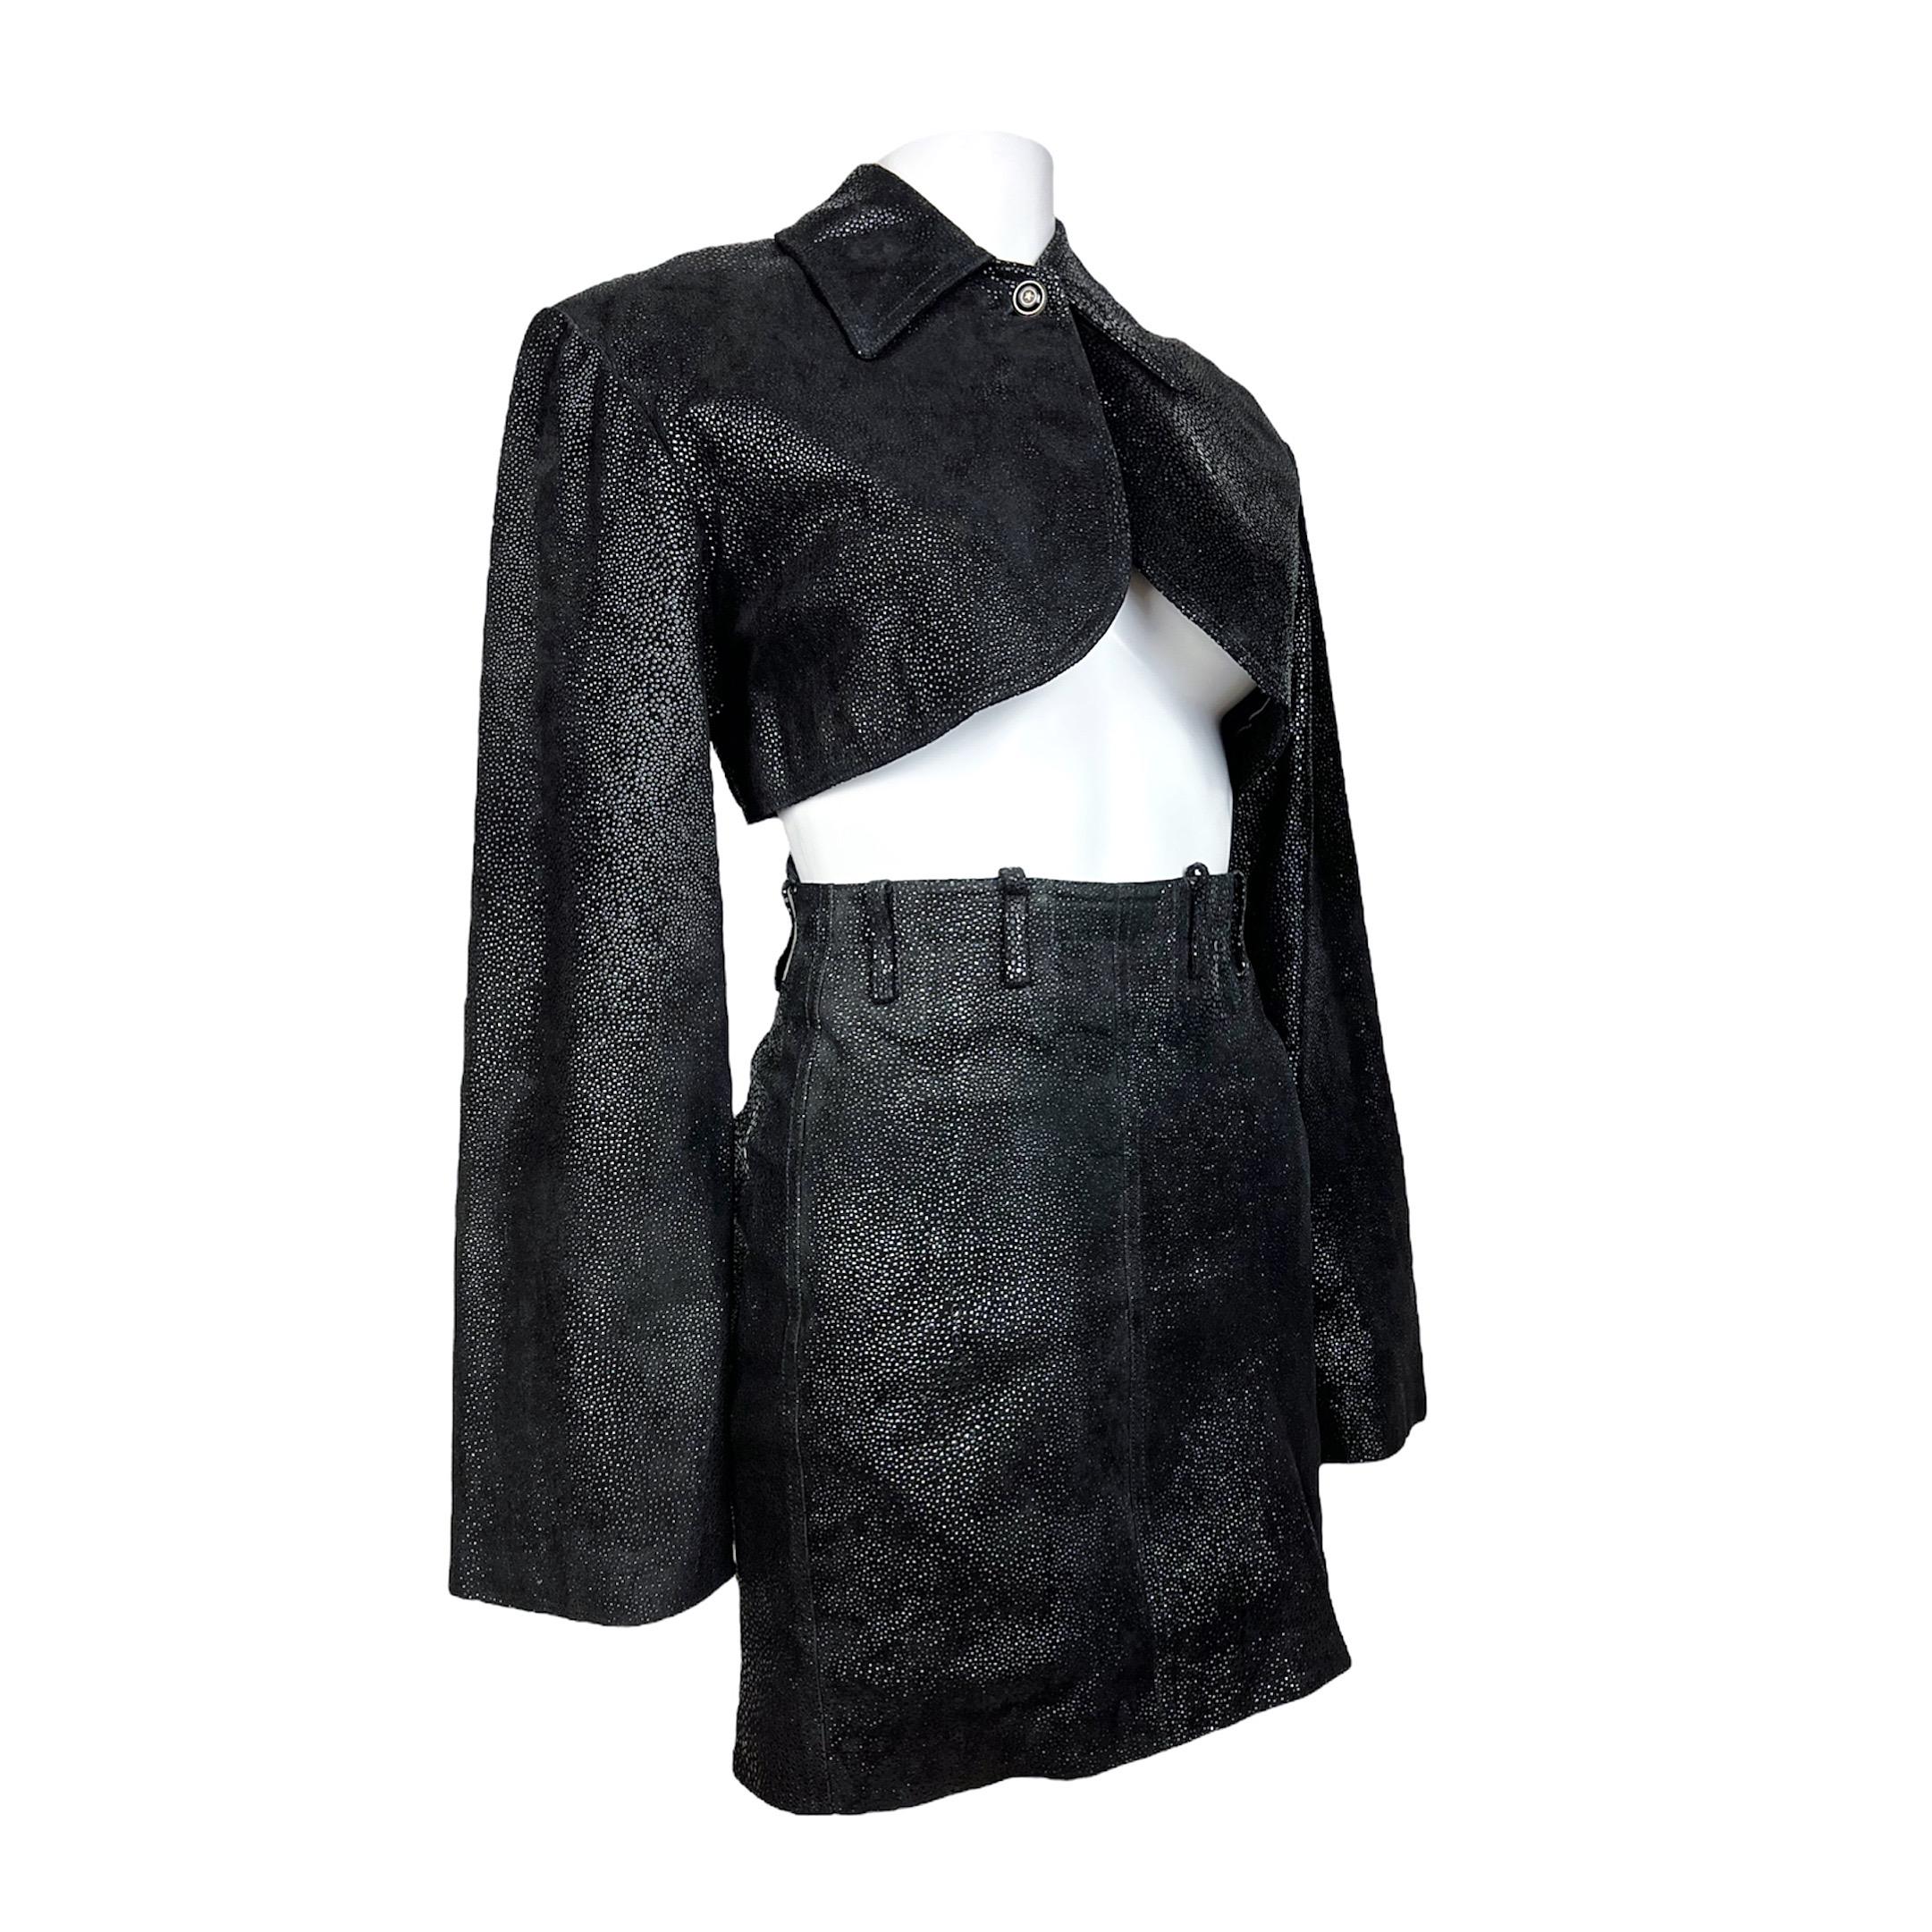 Incredible and very rare Azzedine Alaia 2 pieces set in sting ray embossed leather from Spring Summer 1991 collection. This one of a kind set includes a cropped jacket that closes with one button at the collar and has slightly bell bottom sleeves,